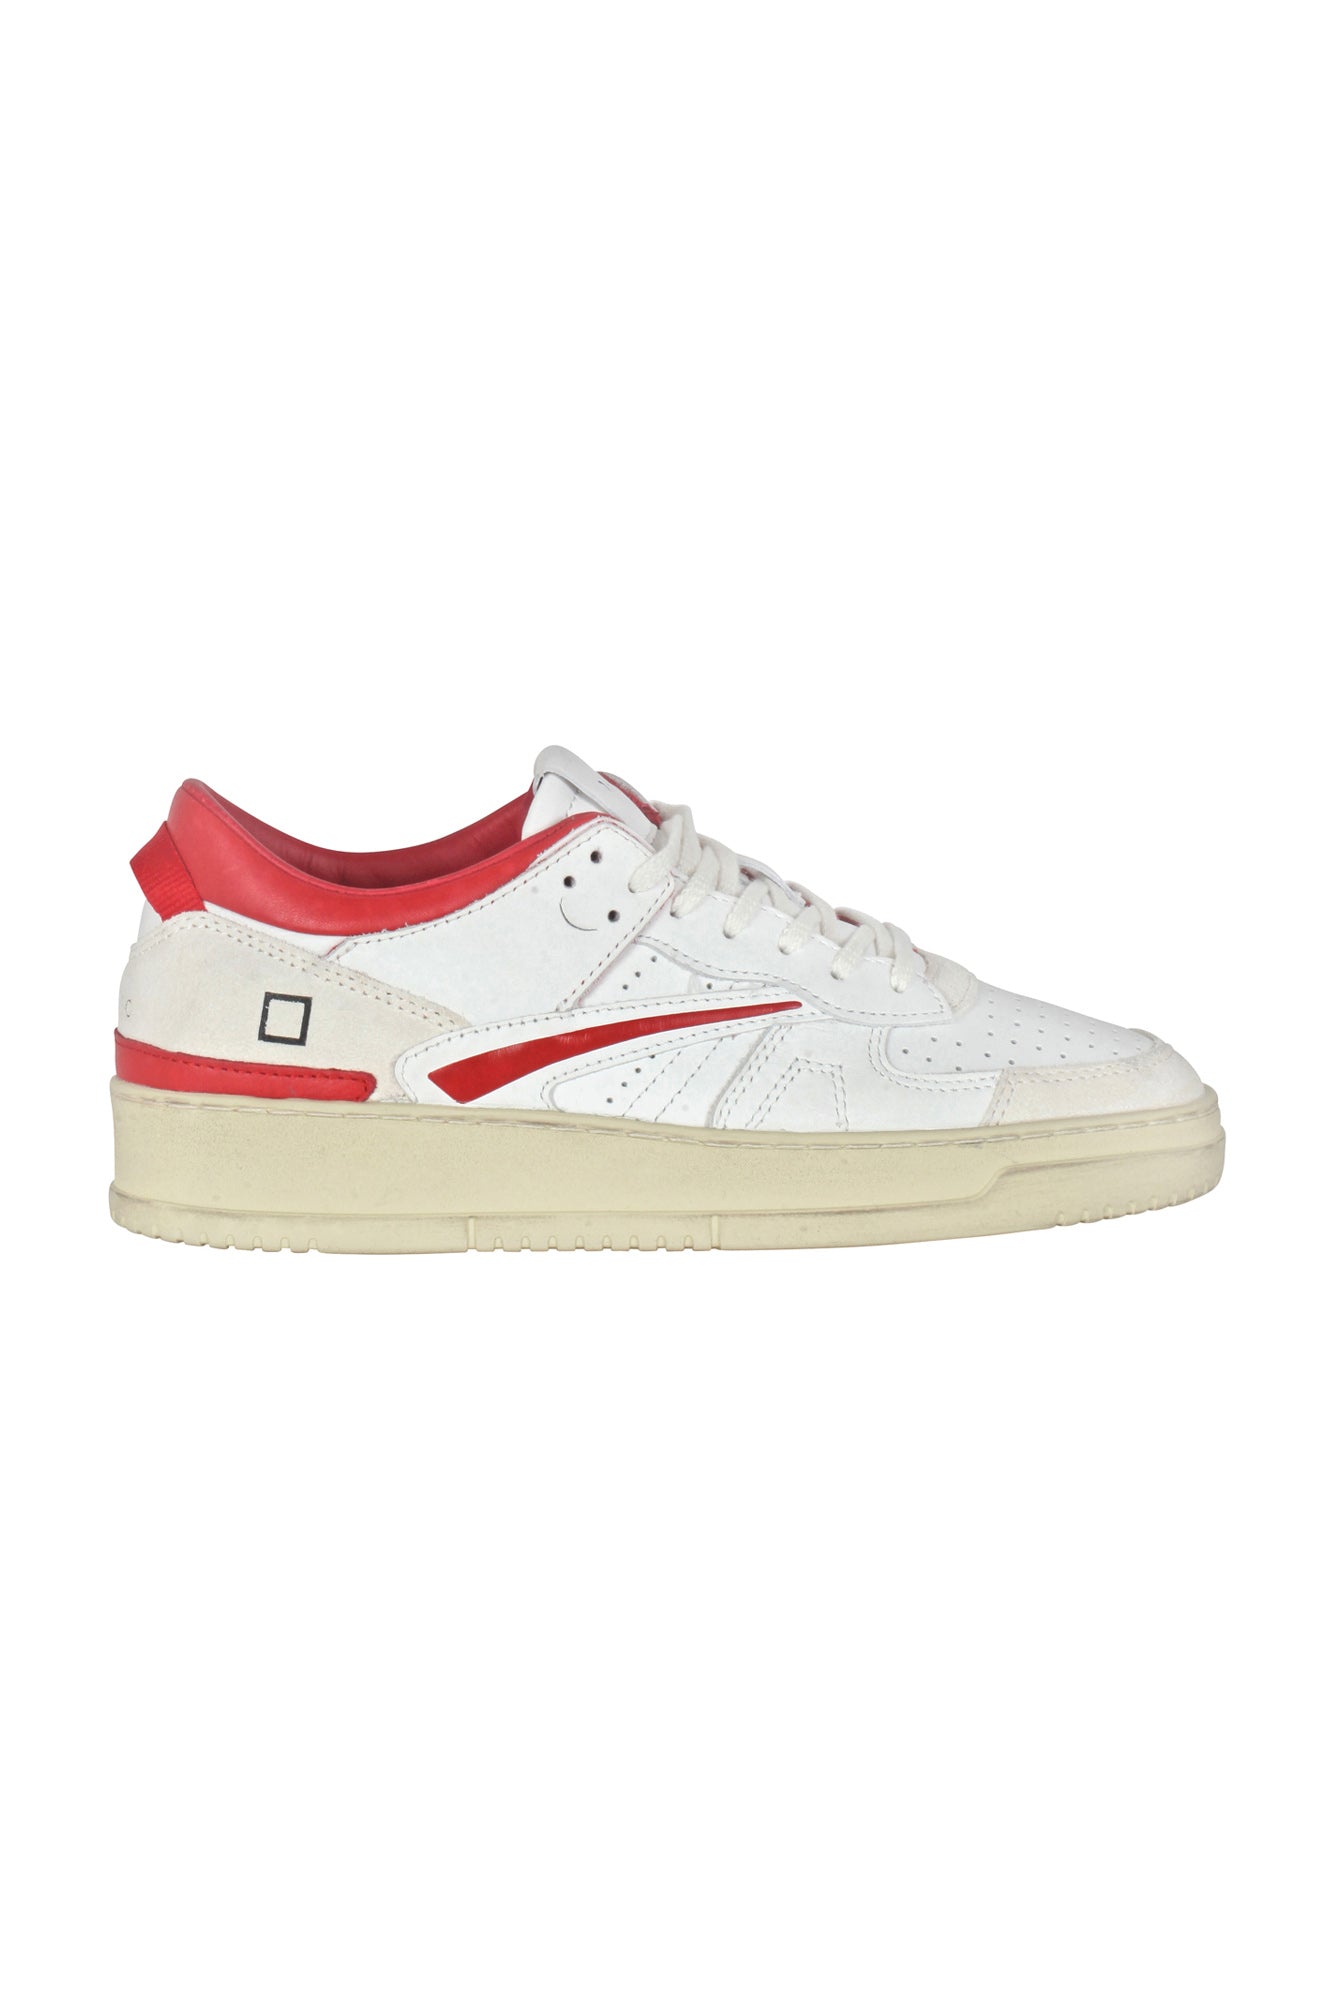 DATE - Sneakers - 430237 - Bianco/Rosso